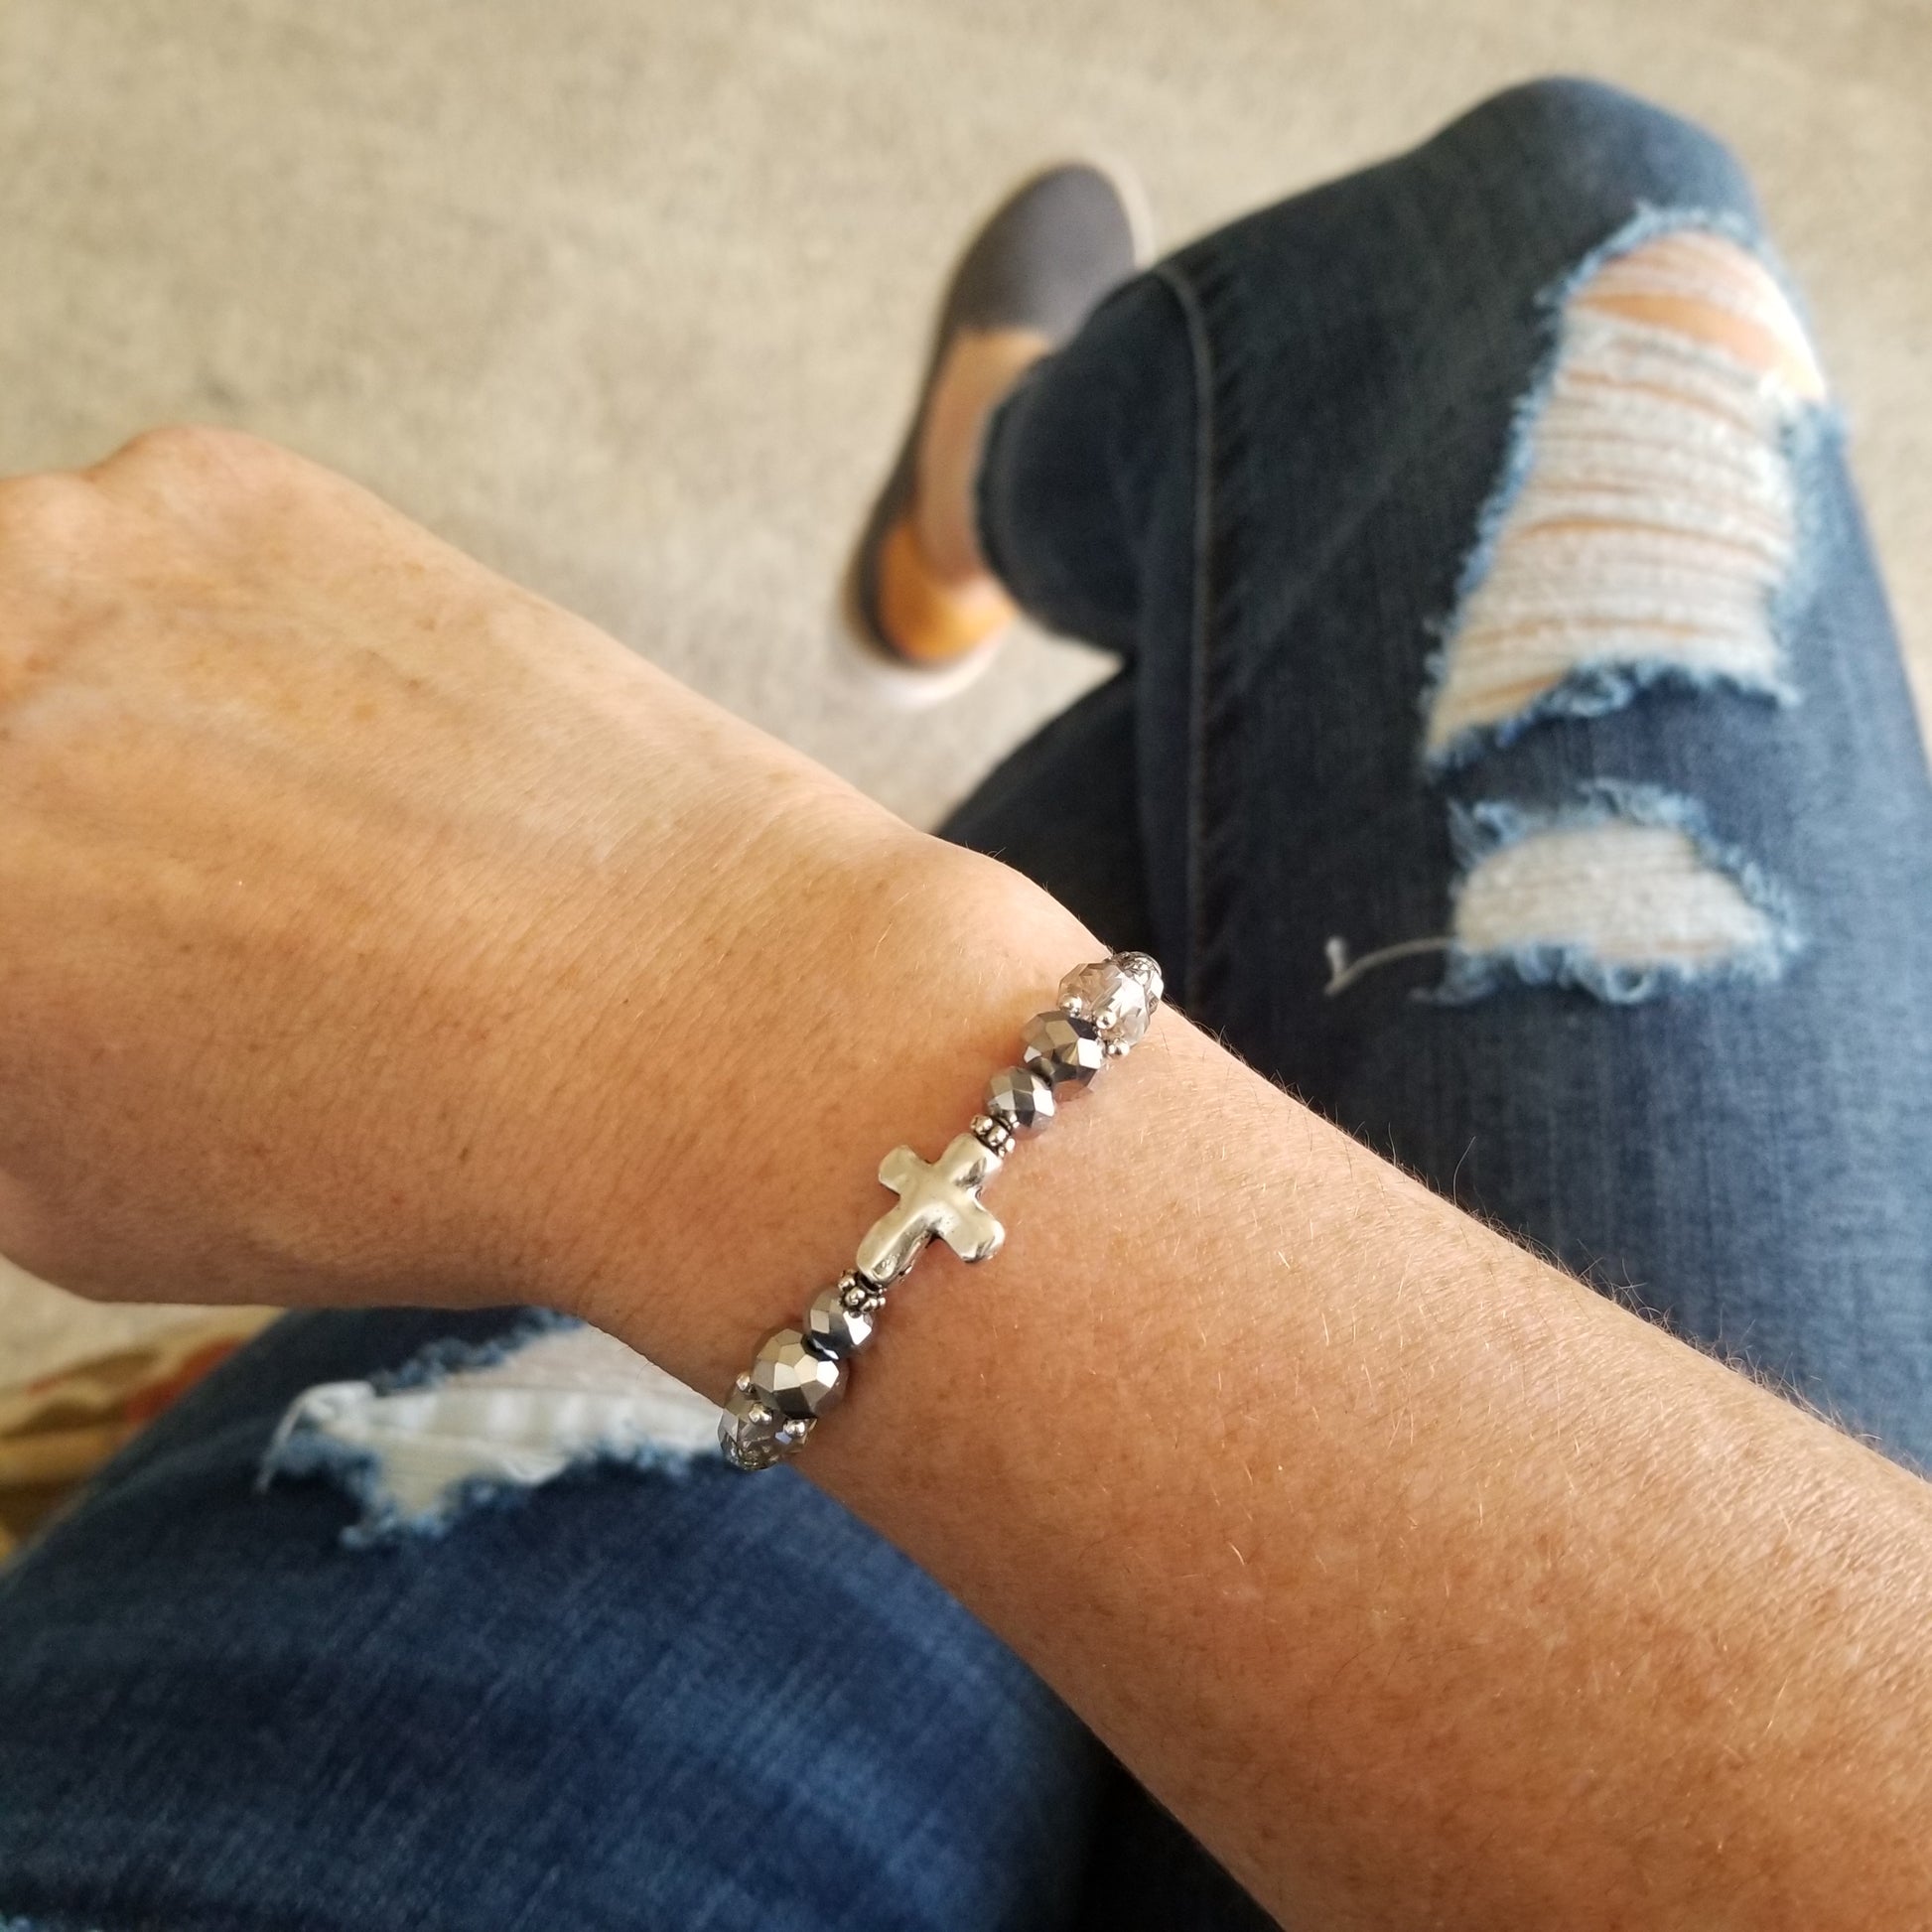 silver cross charm and coordinating faceted glass beads wrap bracelet on wrist